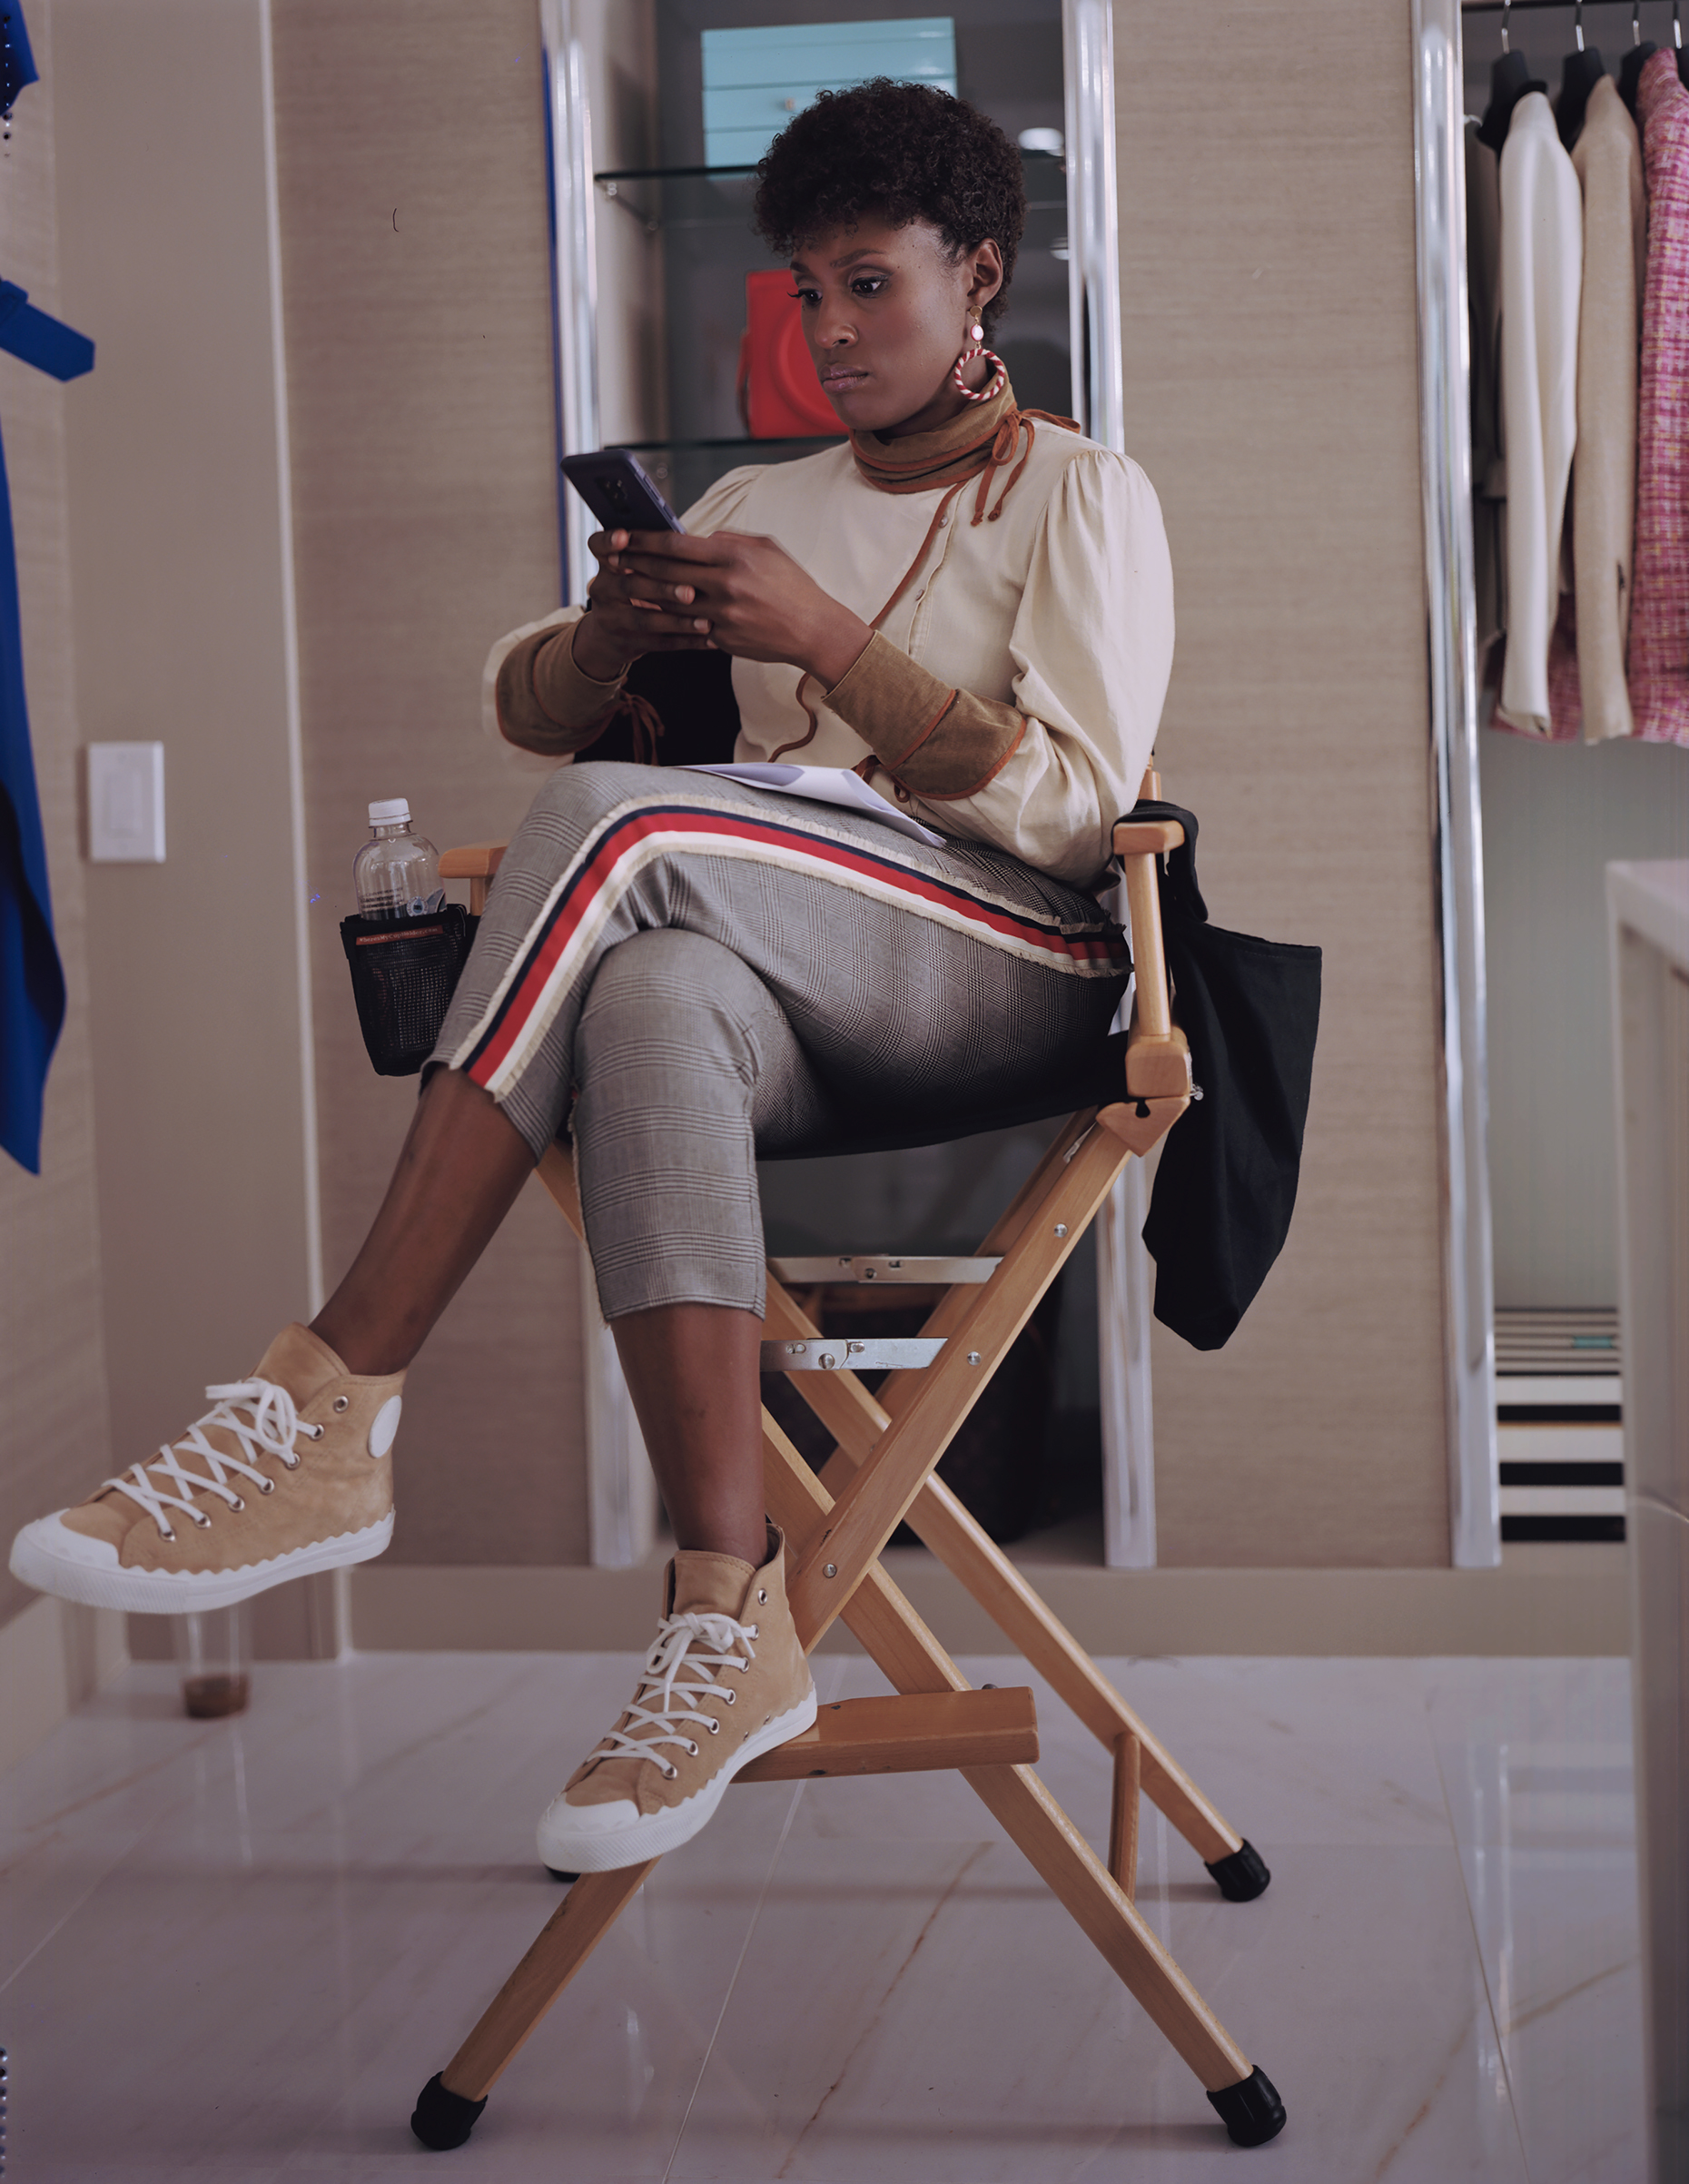 Issa Rae looks over her script on the set of Universal Pictures’ Little. Marsai Martin is executive-producing with Will Packer, who has grossed some $500 million at the box office with other Georgia-based films like Ride Along, No Good Deed and Stomp the Yard. (RaMell Ross for TIME)